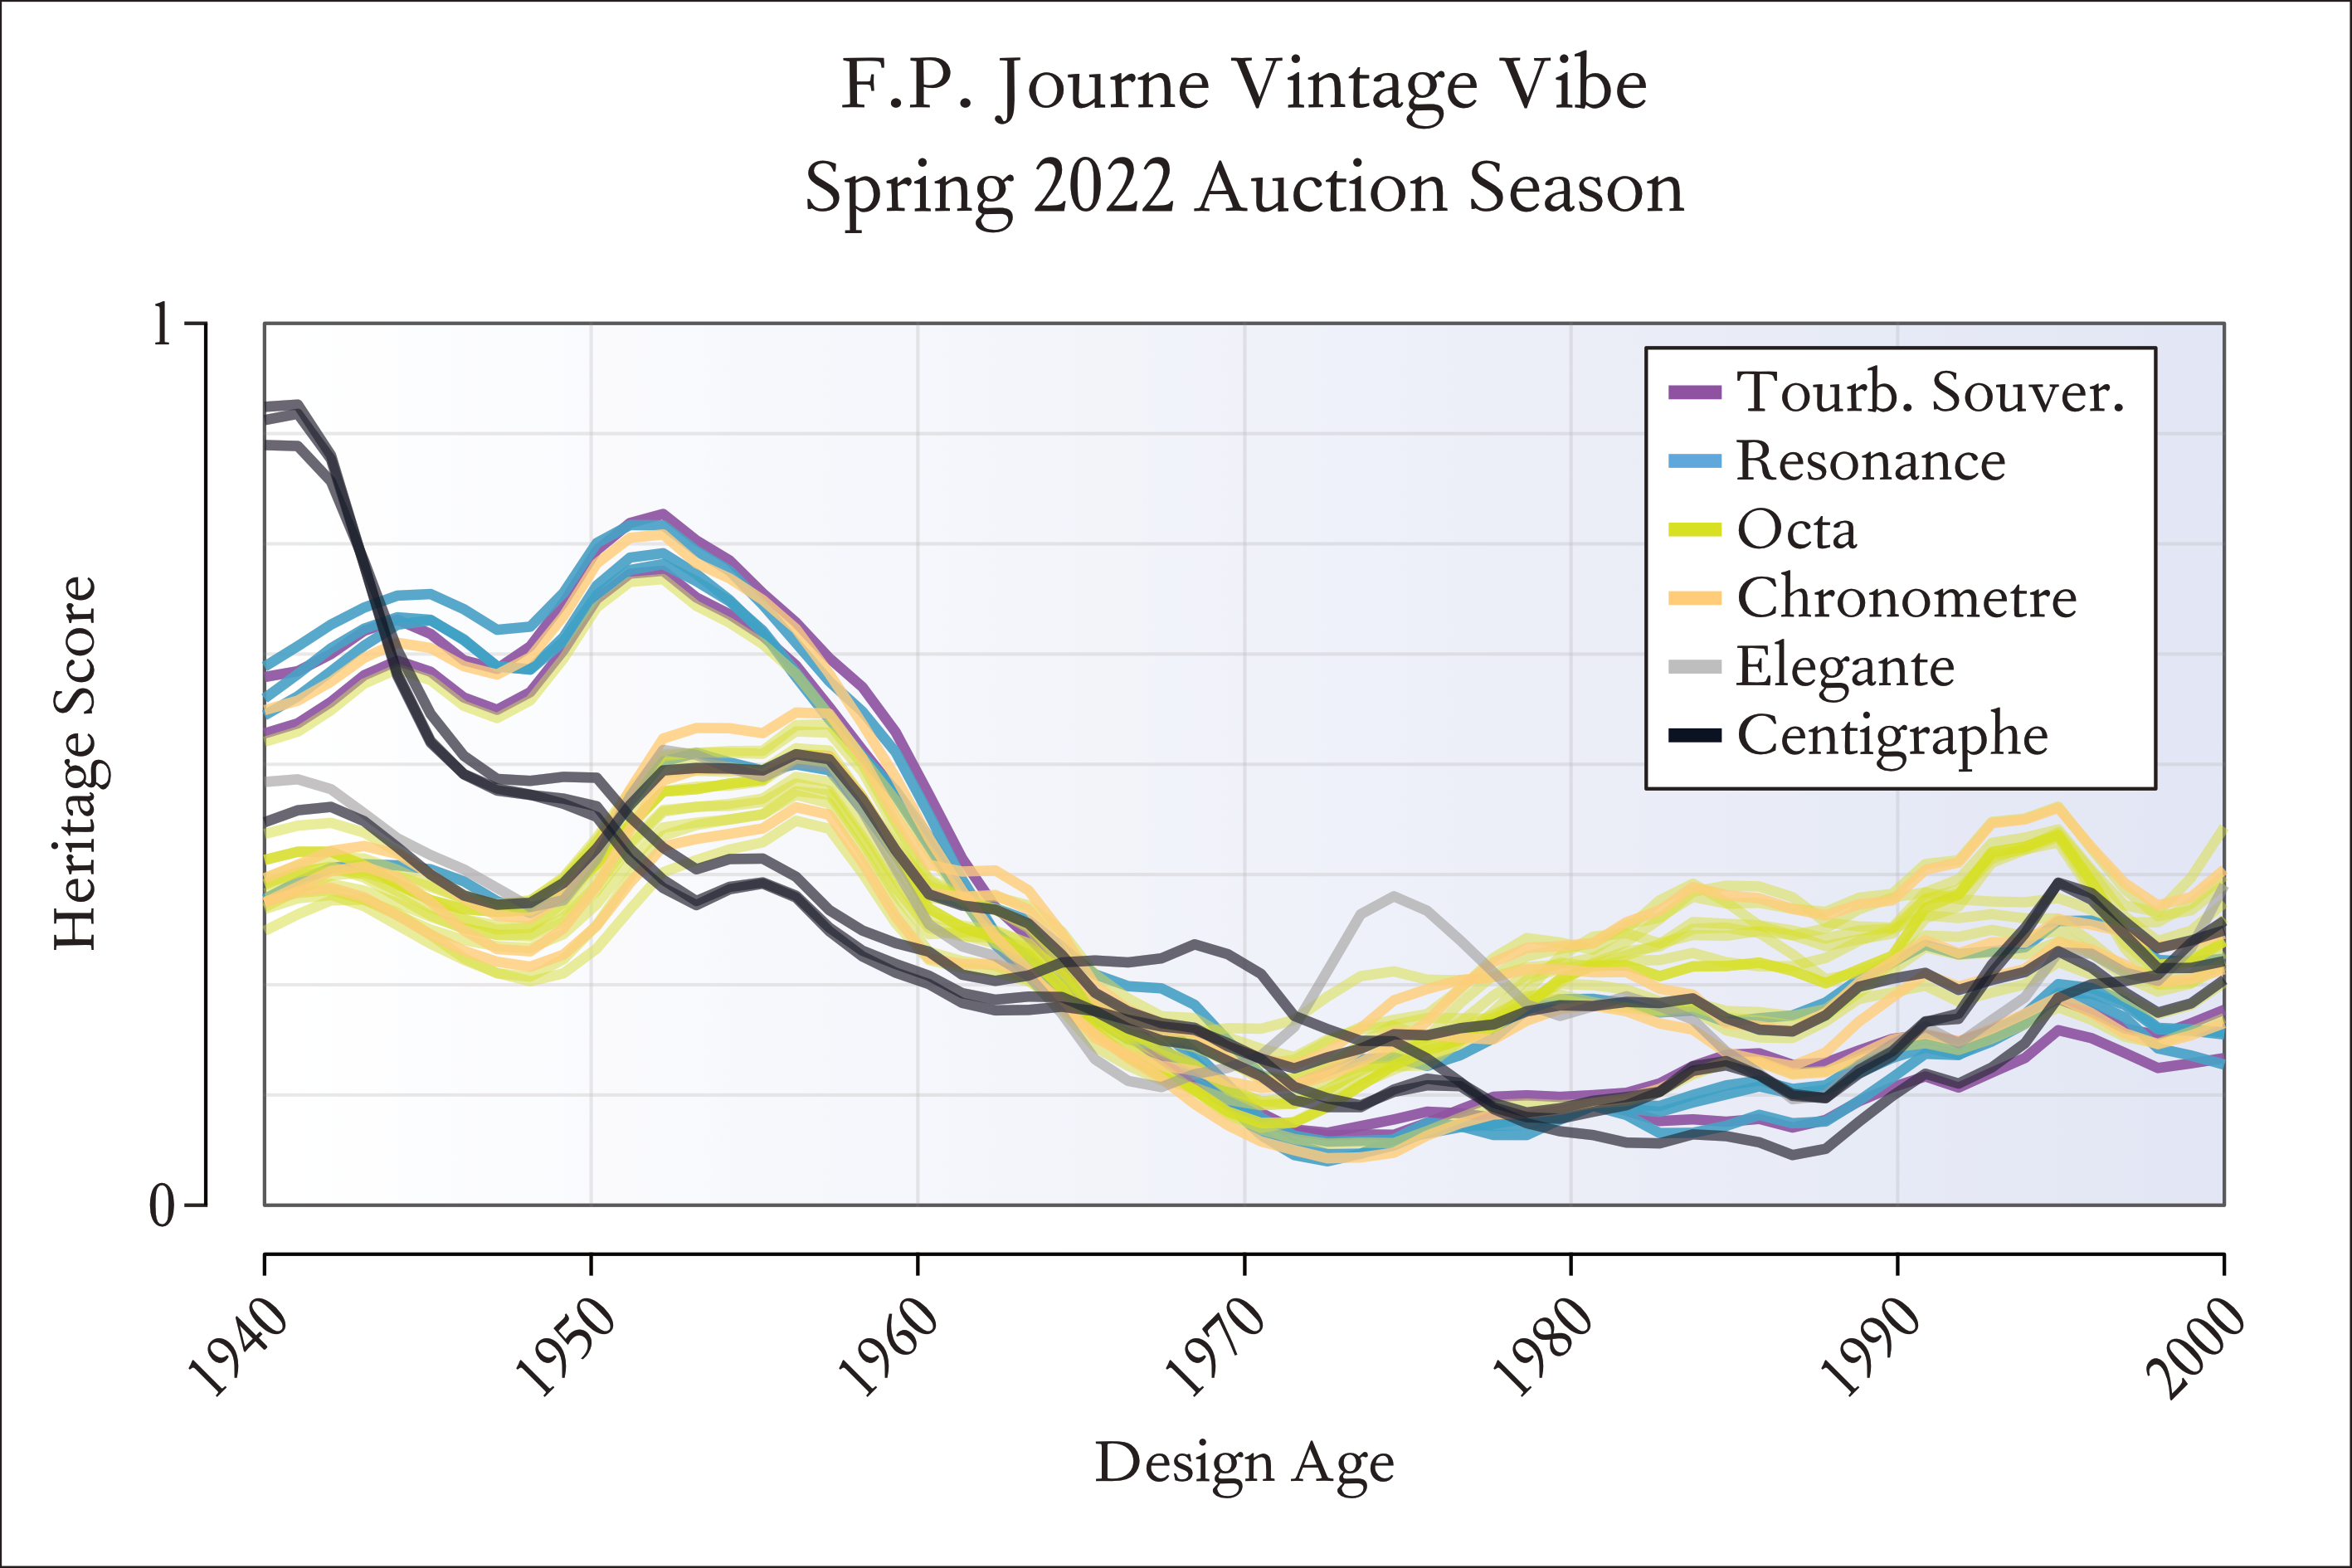 FP Journe vintage vibe from the spring 2022 auction season